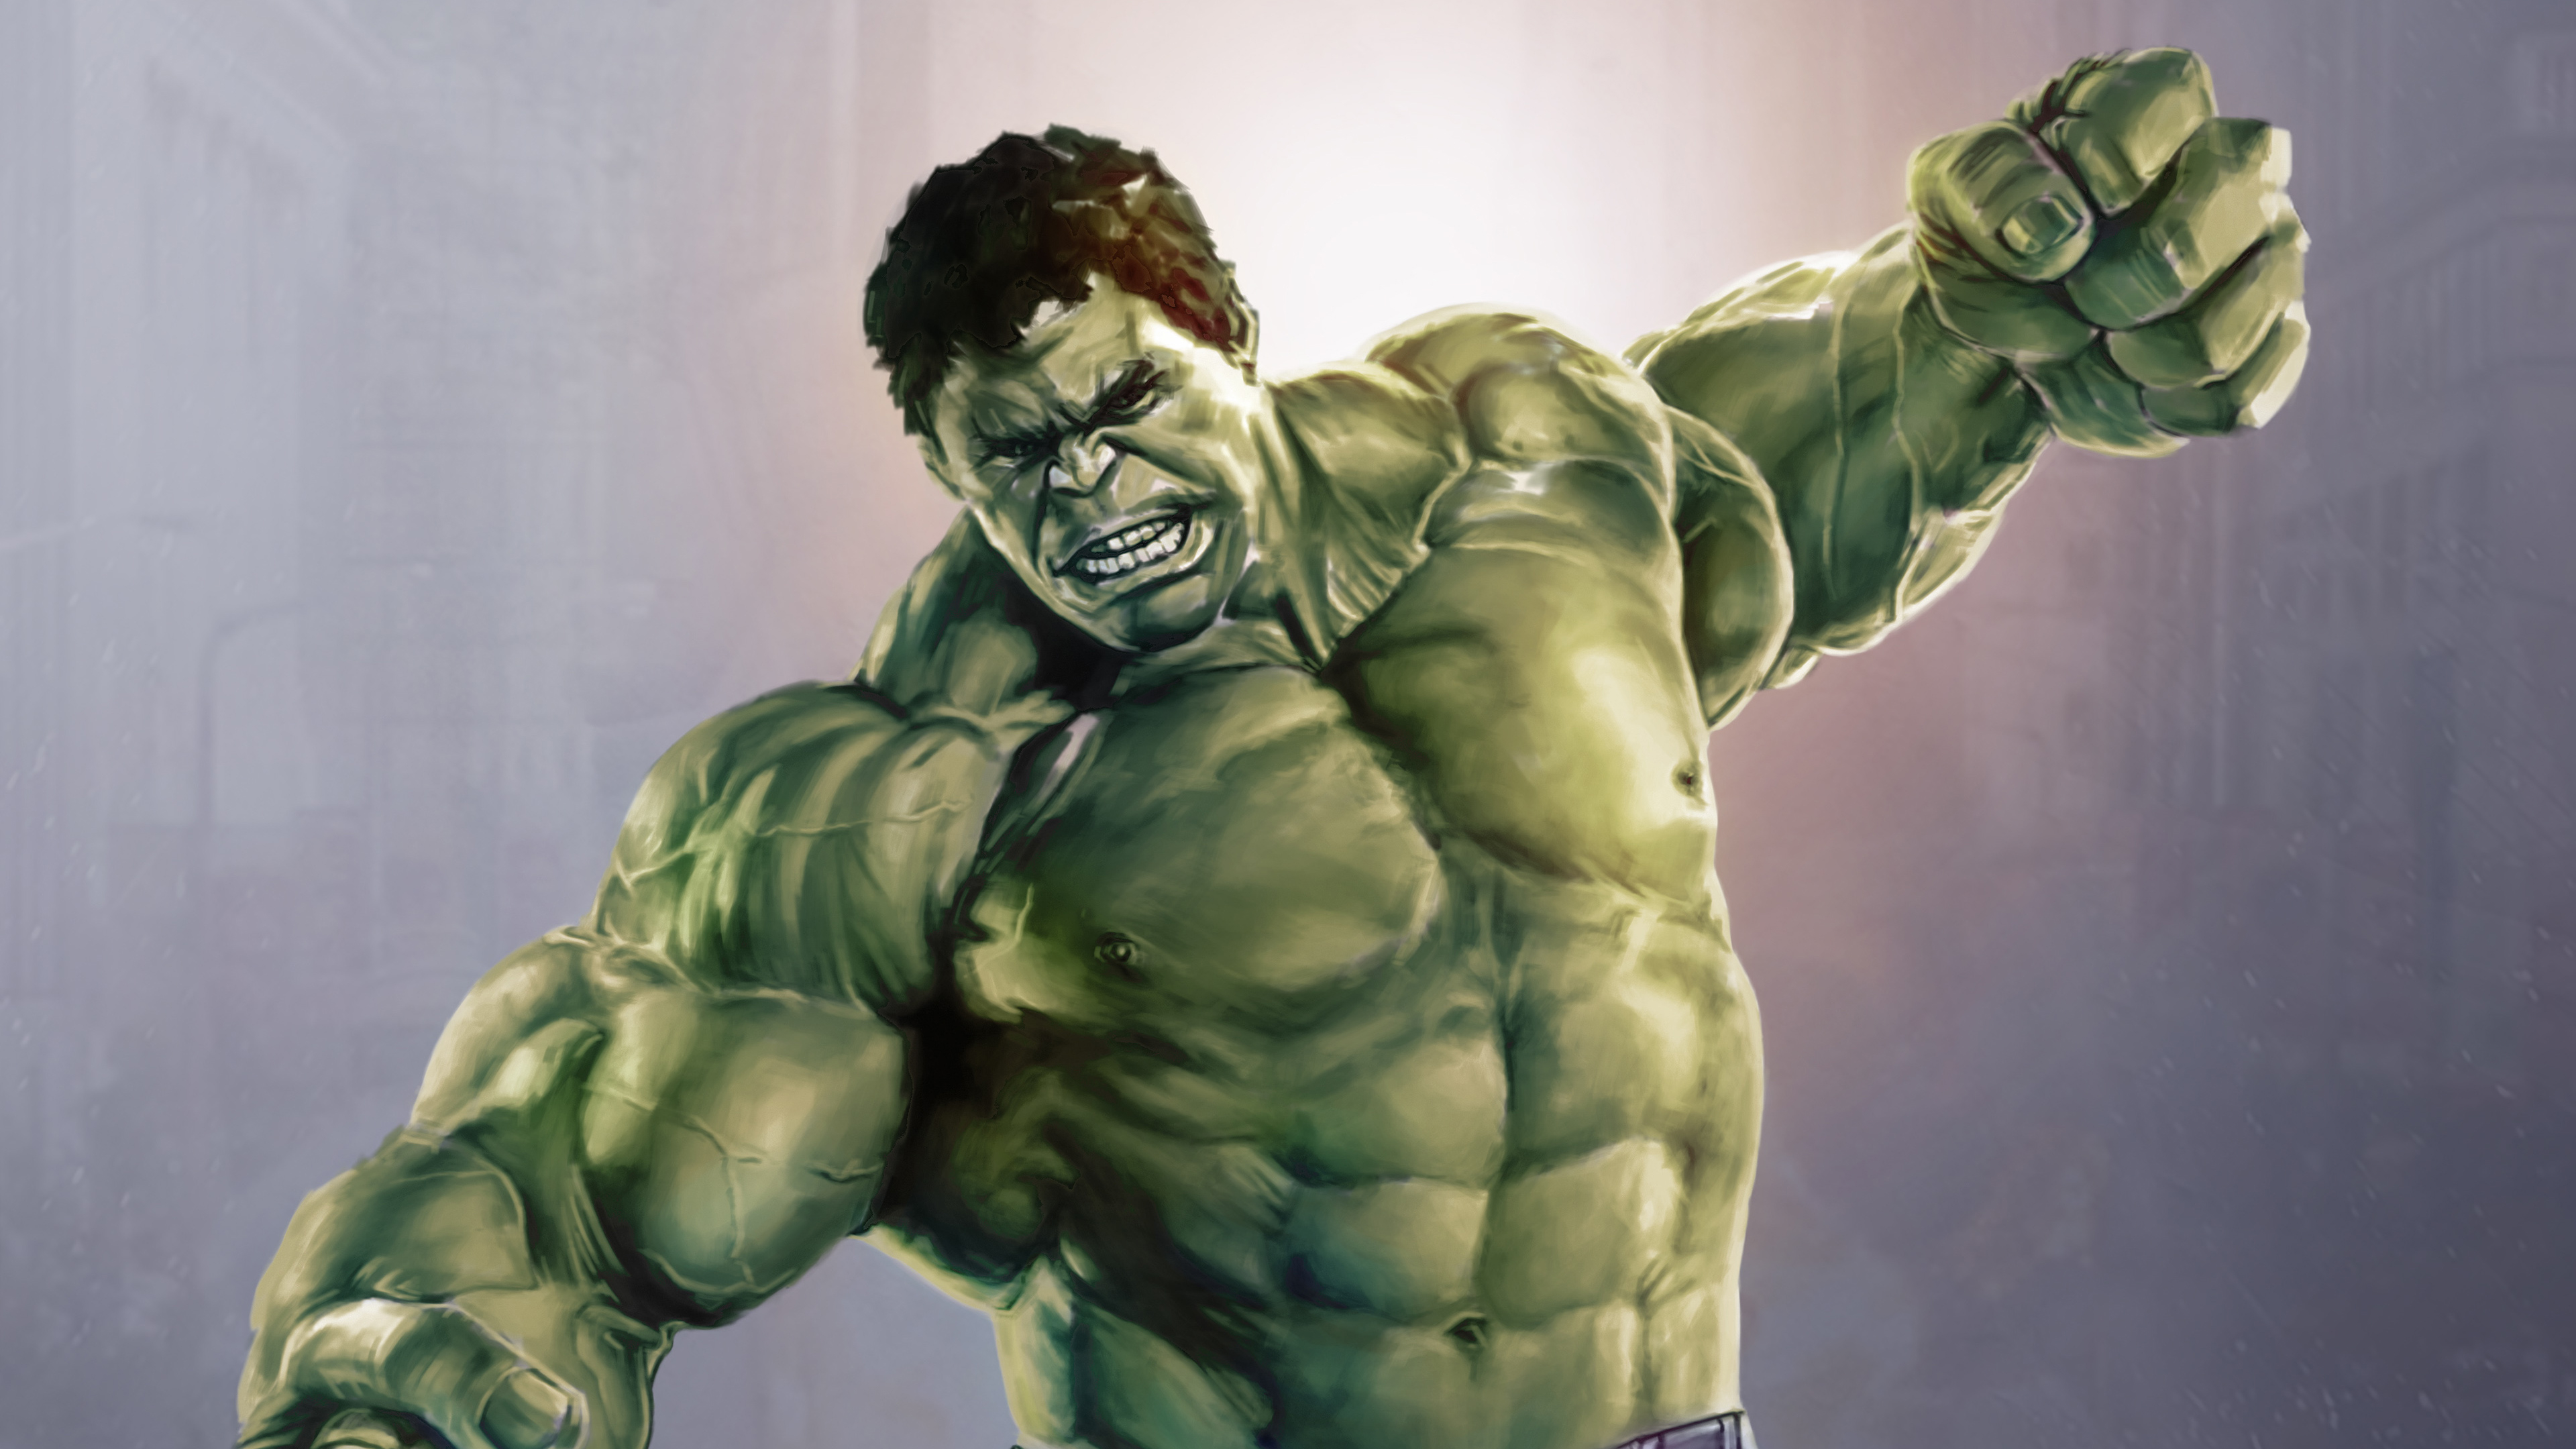 3840x2160 1920x1080 Incredible Hulk Avengers Laptop Full HD 1080P HD 4k Wallpapers, Images, Backgrounds, Photos and Pictures